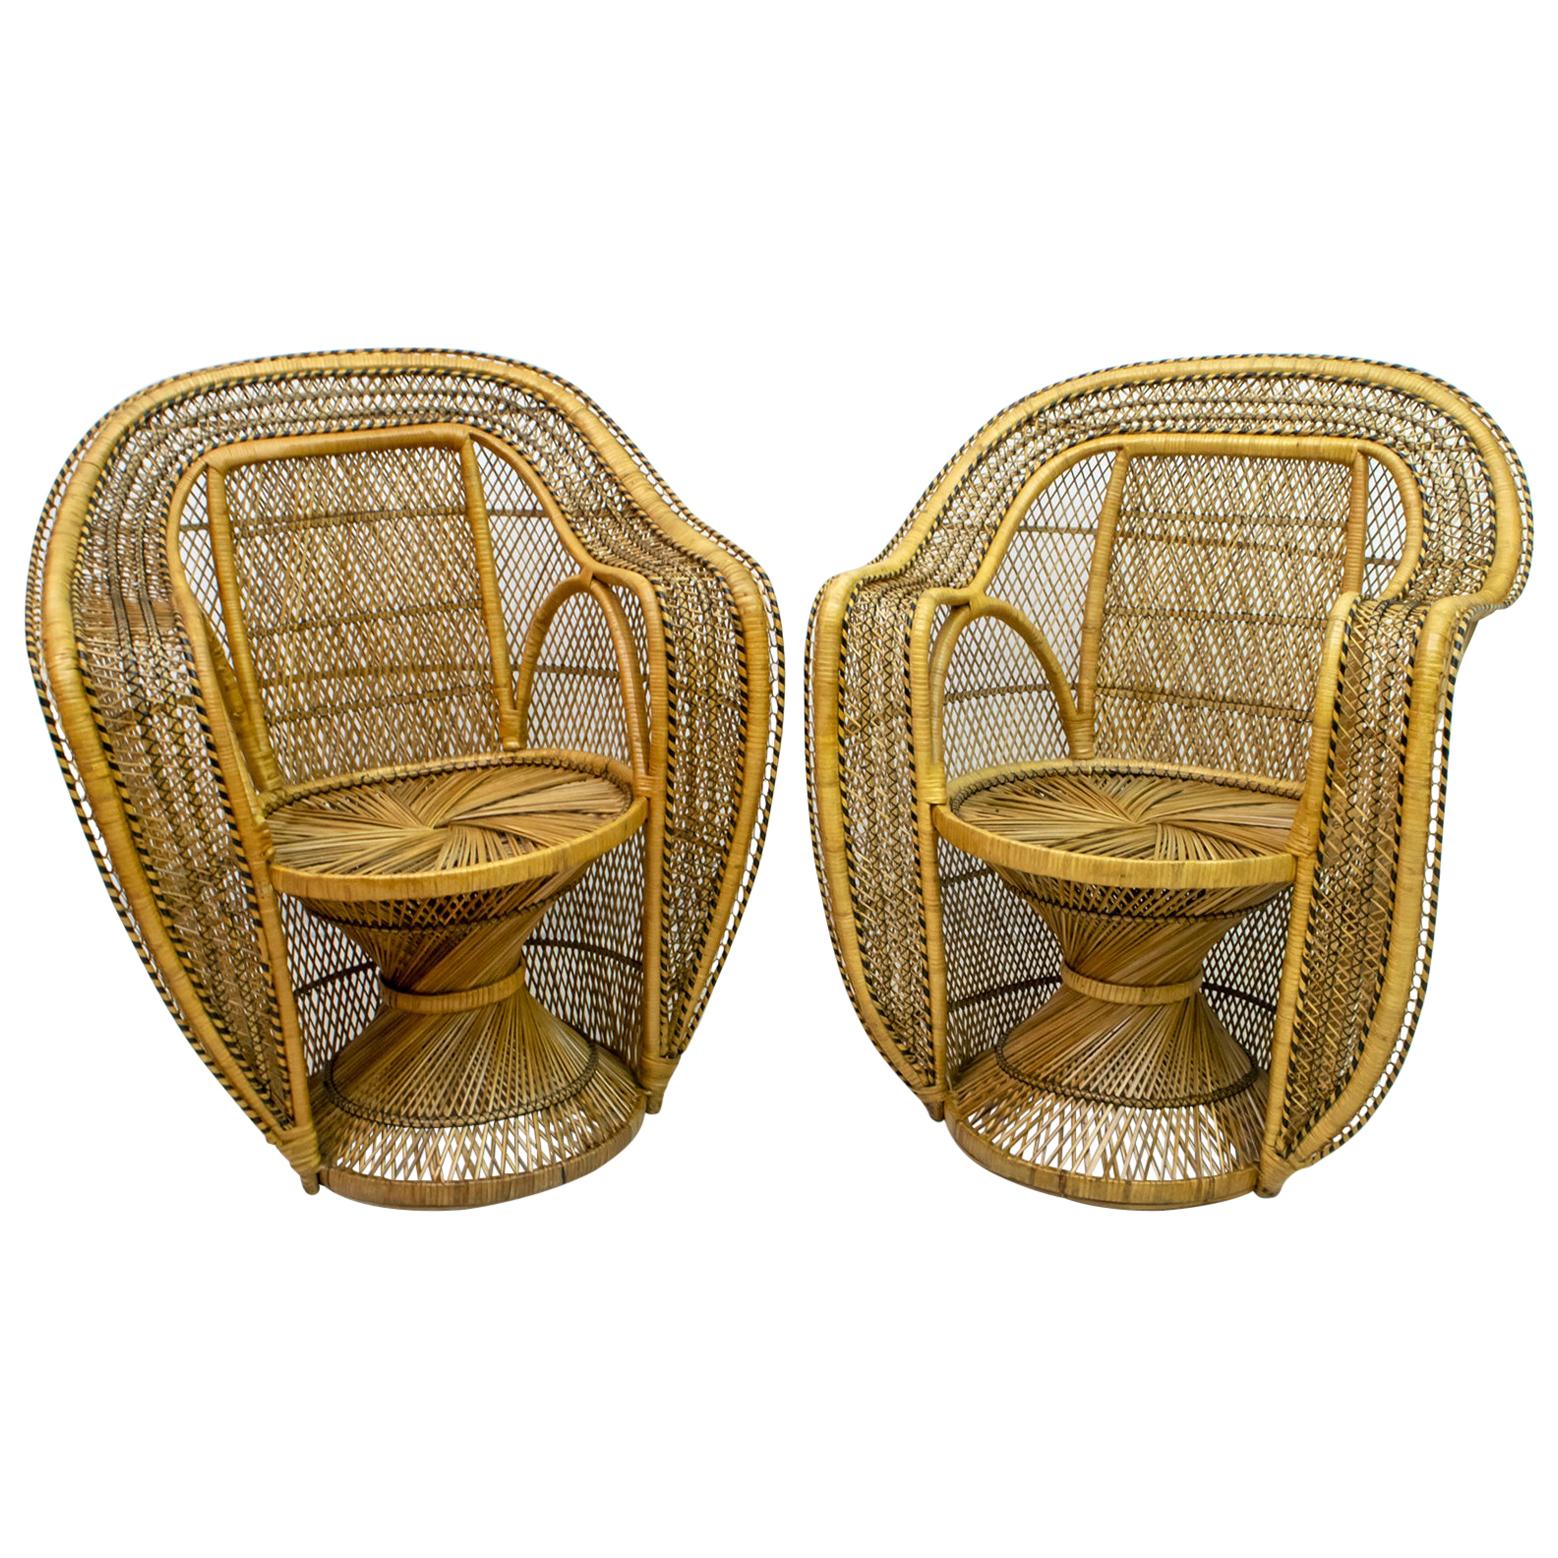 Pair of Mid-Century Modern Wicker Emmanuelle Armchairs from Kok Maison, 1970s For Sale